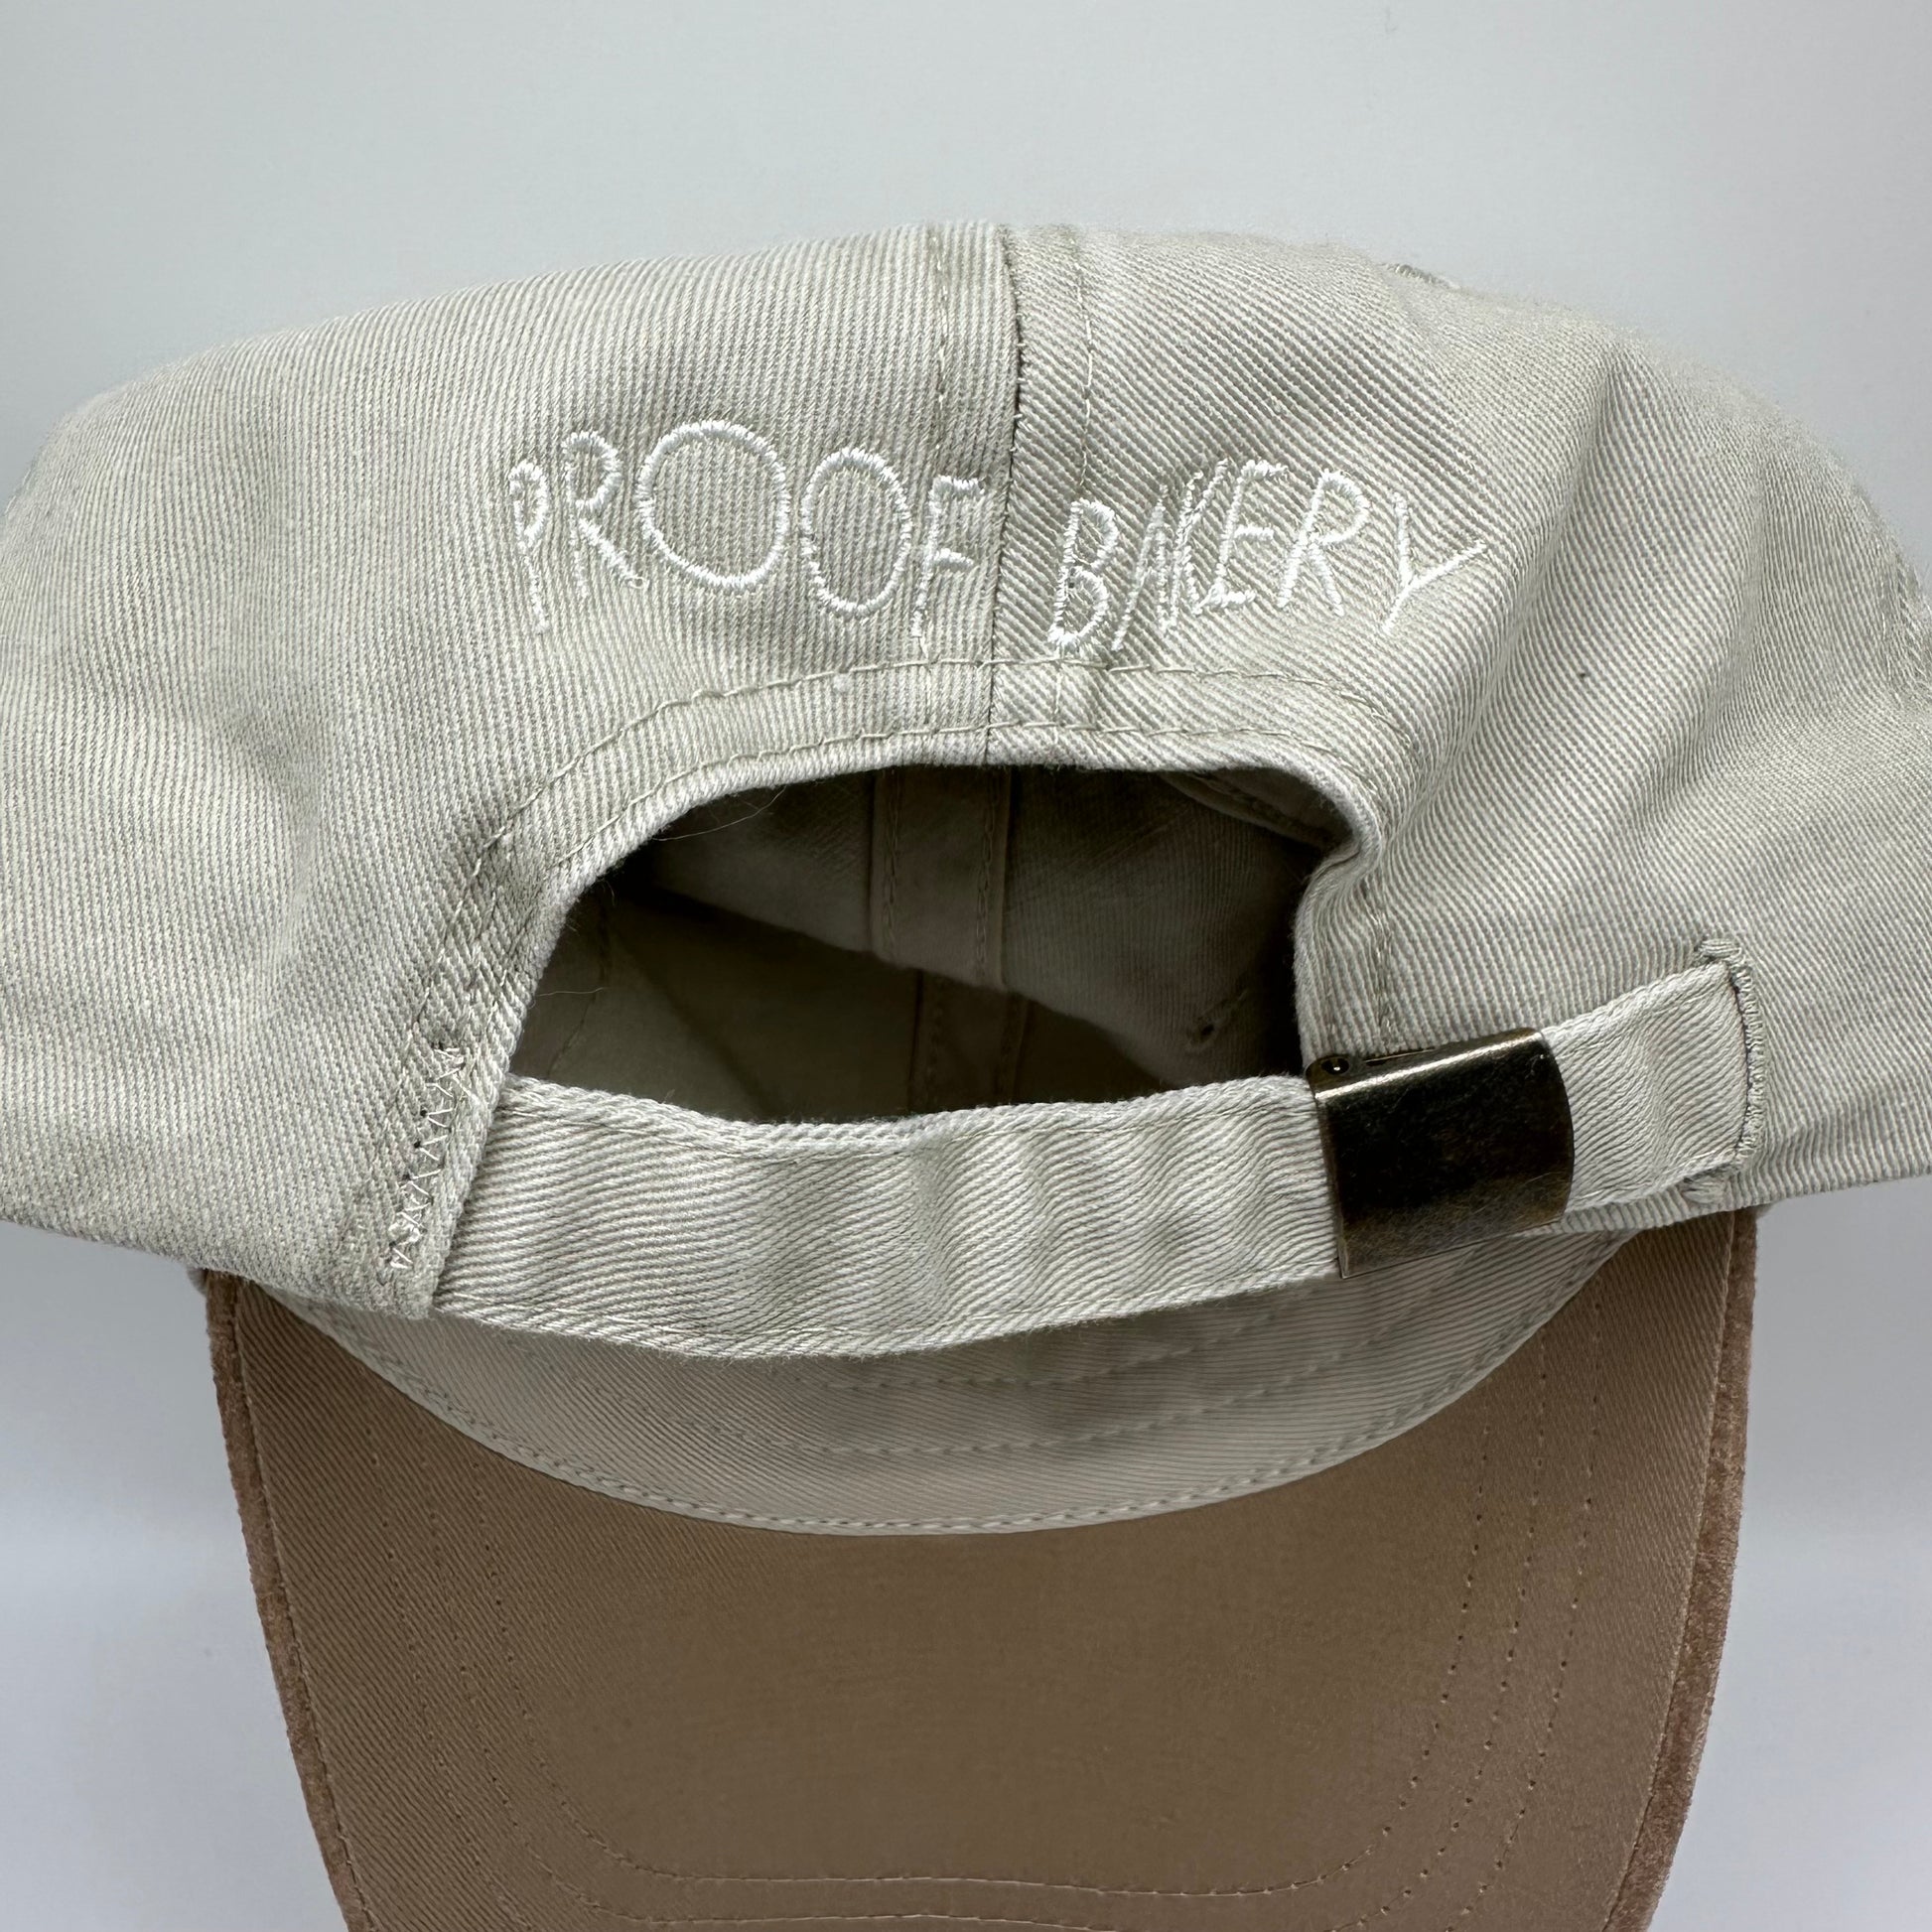 Back of hat with words: Proof Bakery